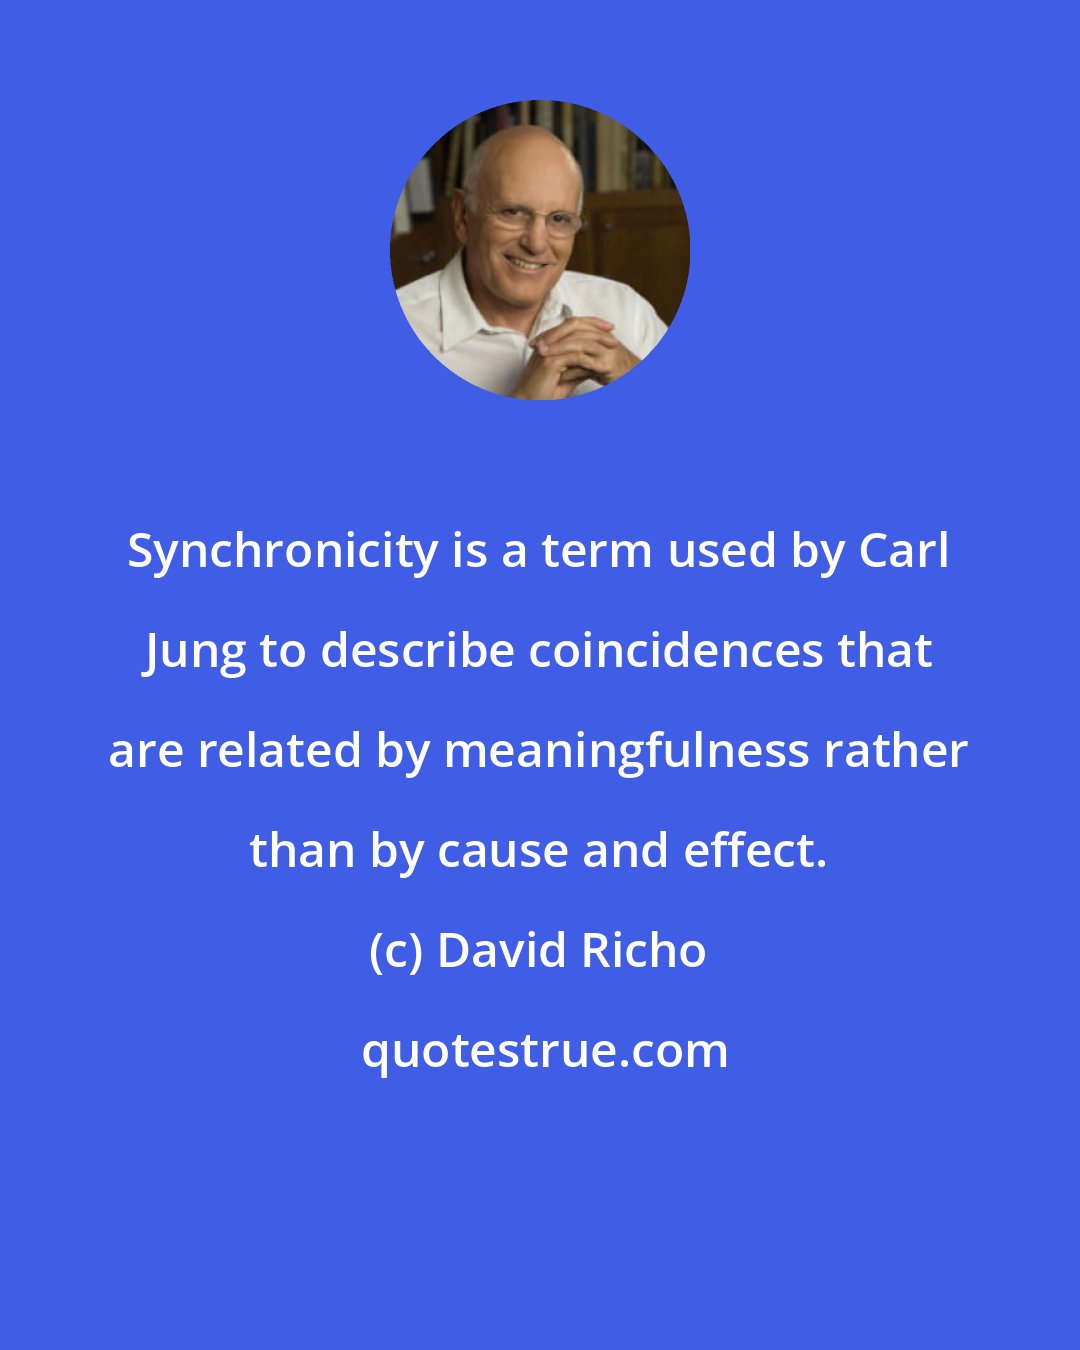 David Richo: Synchronicity is a term used by Carl Jung to describe coincidences that are related by meaningfulness rather than by cause and effect.